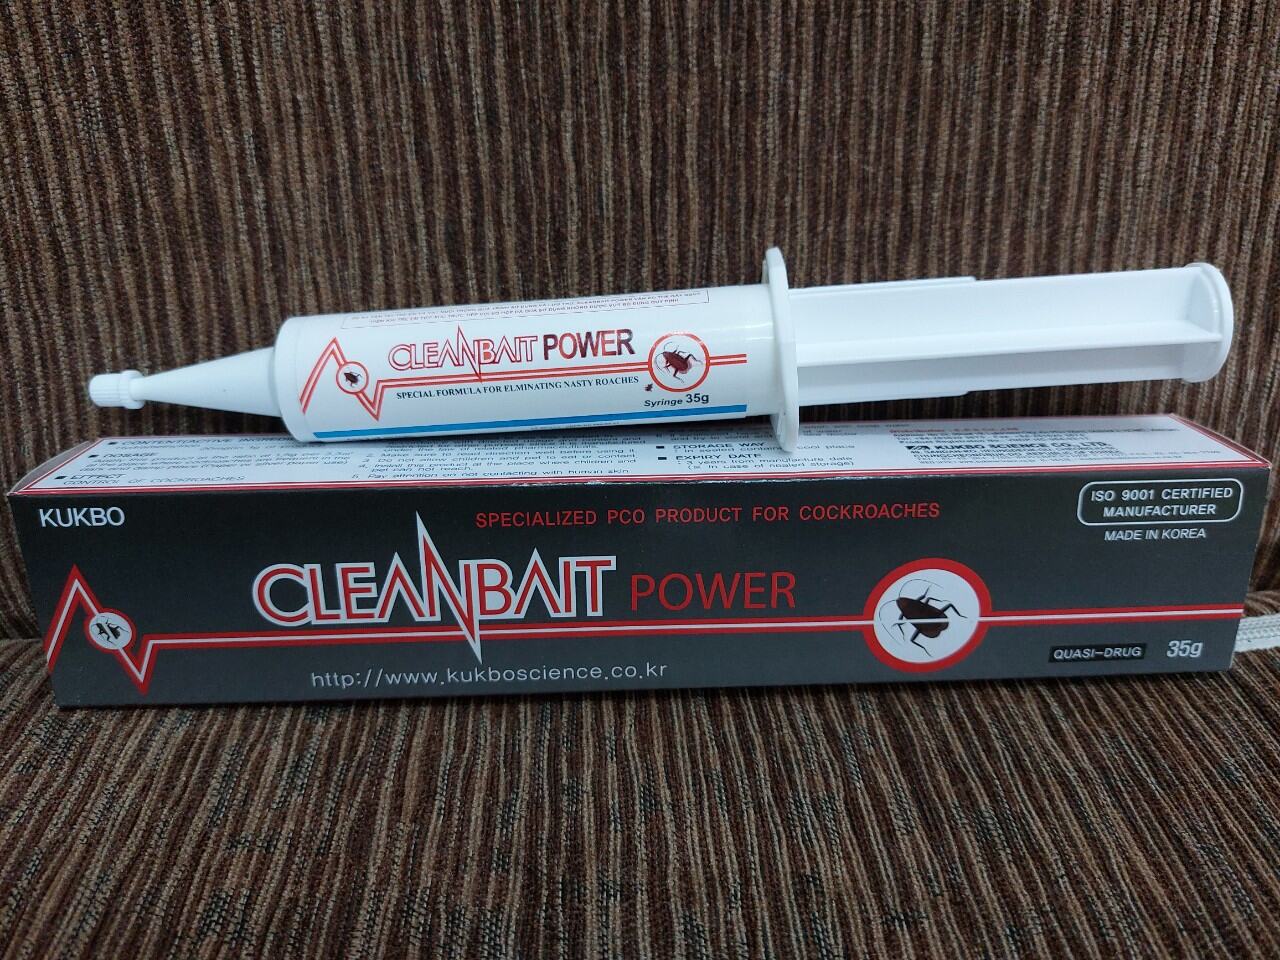 cleanbait power, cleanbait power Suppliers and Manufacturers at